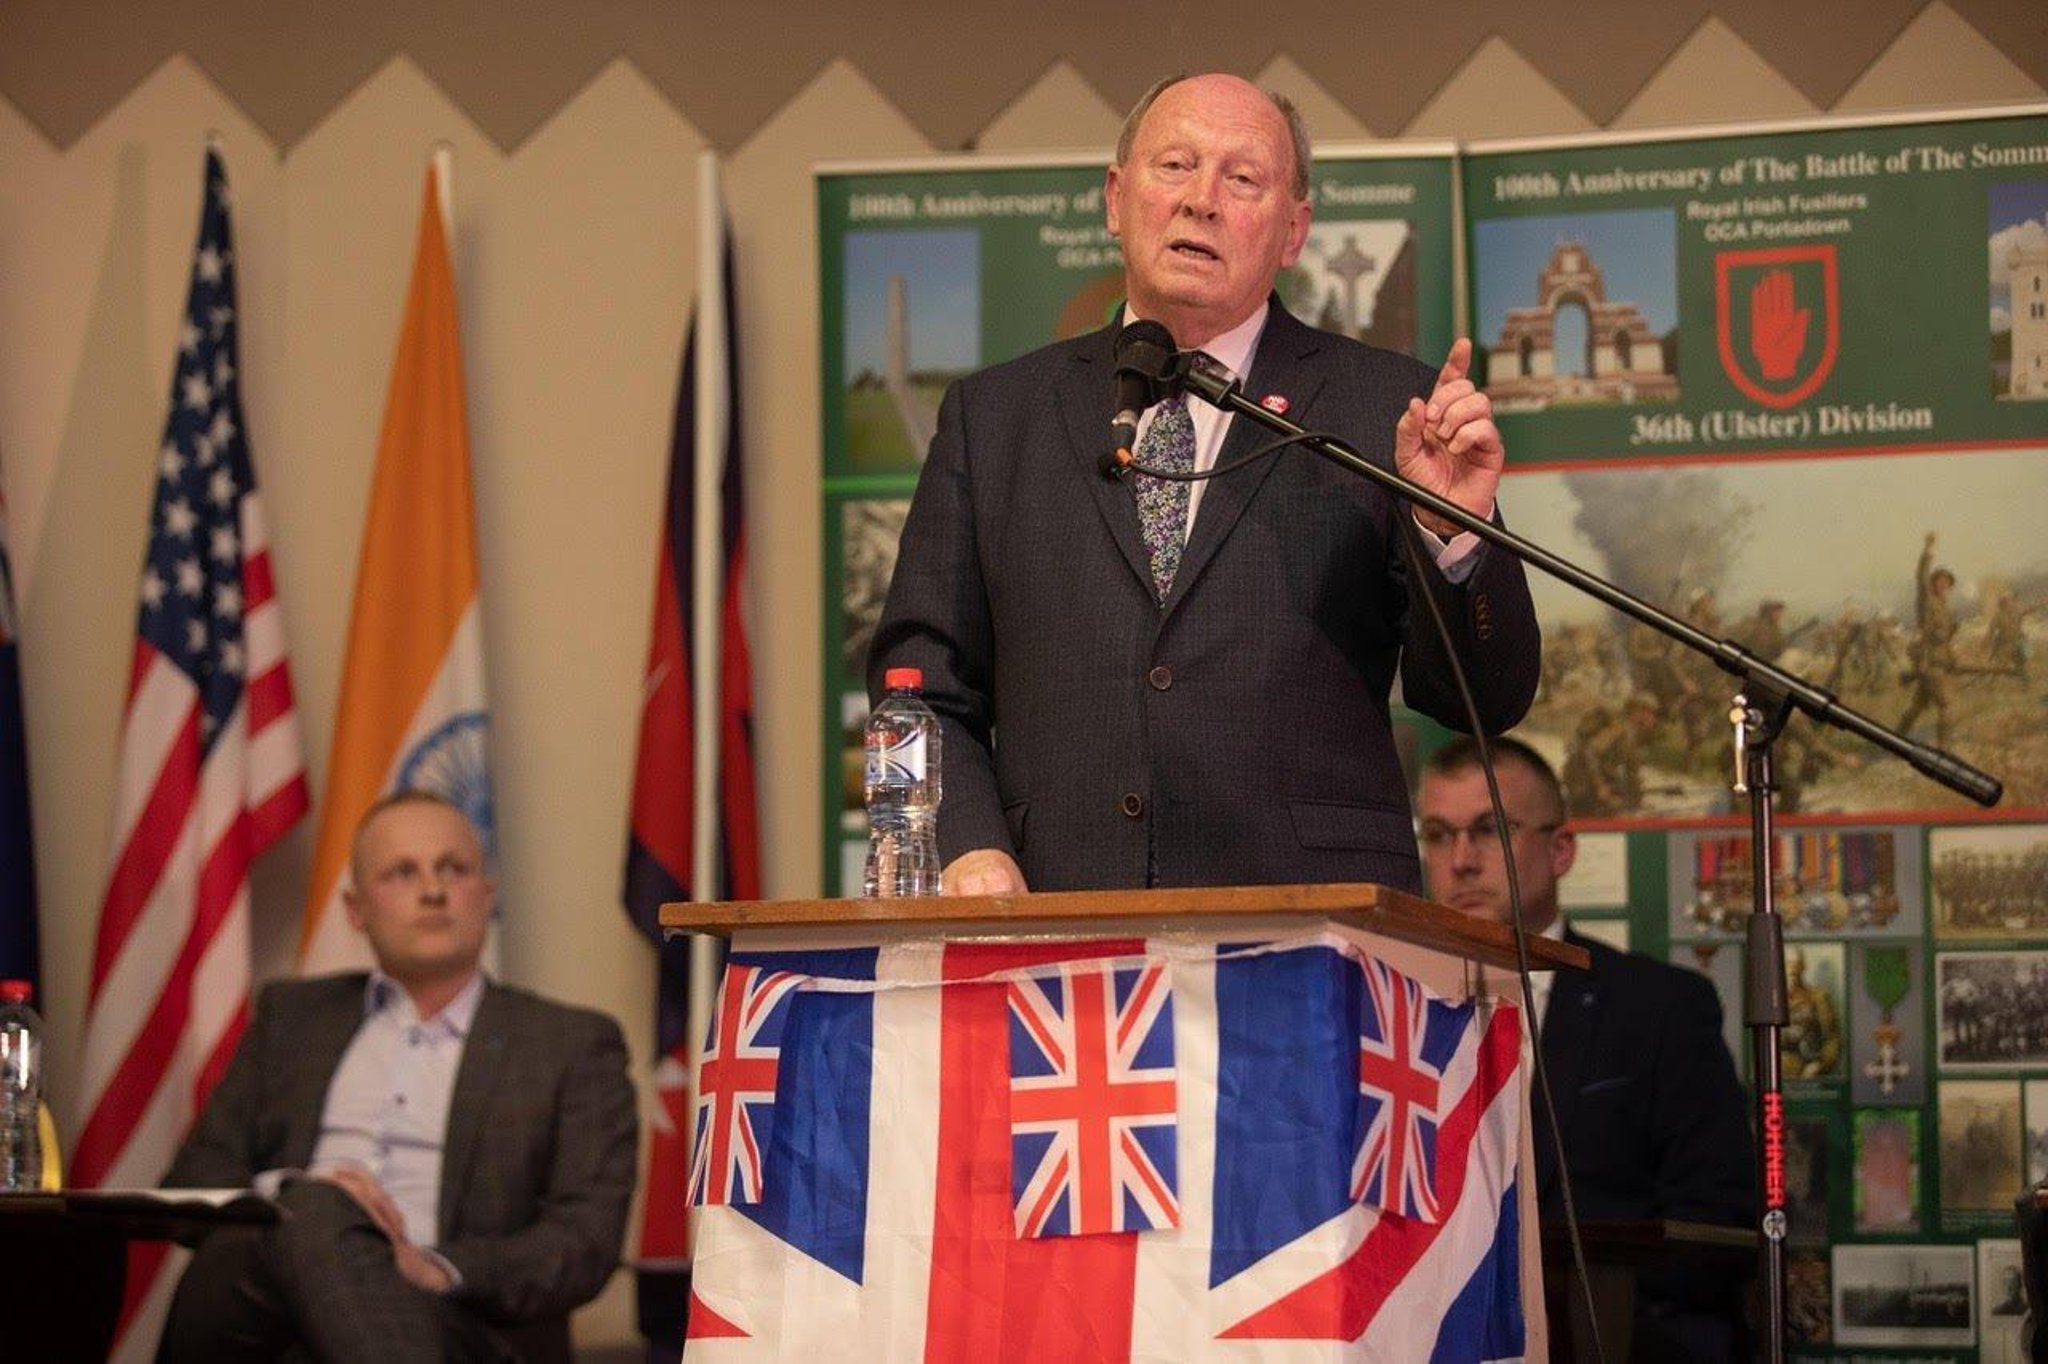 'Major rally' details announced as unionists voice regret at Sinn Fein anonymity ruling